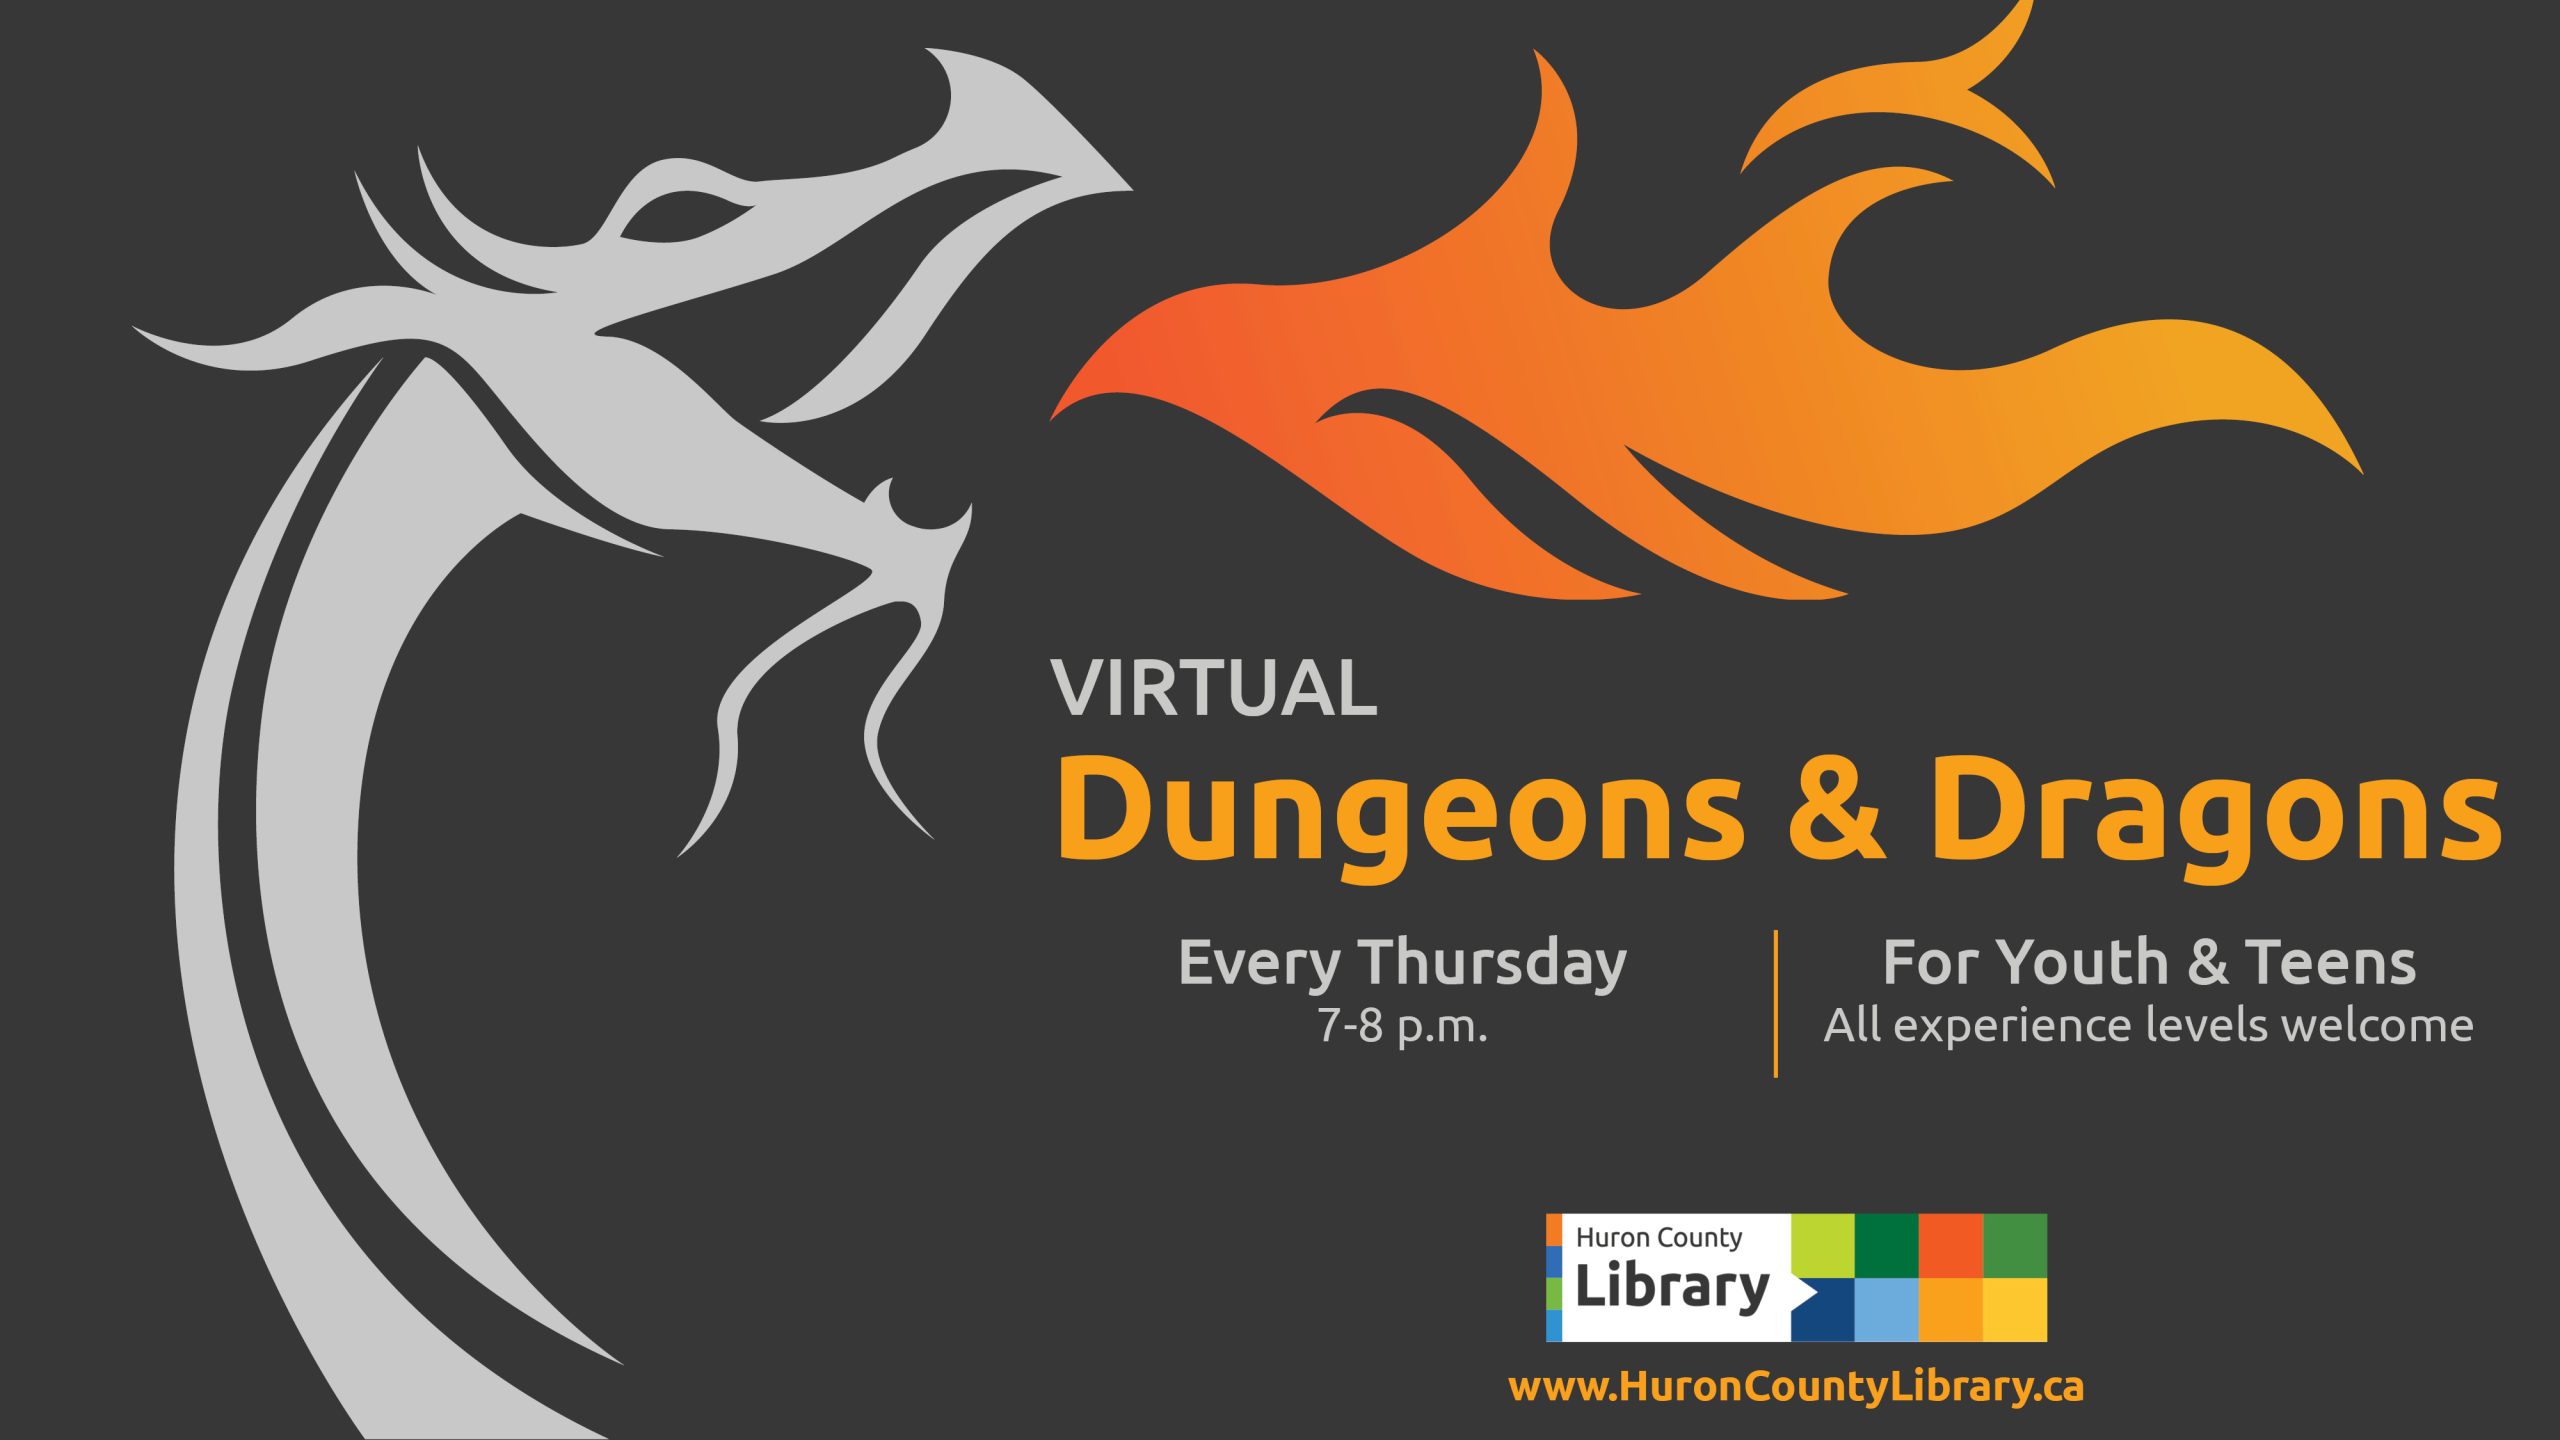 Illustration of a dragon with fiery breath and text promoting virtual Dungeons & dragons for teens